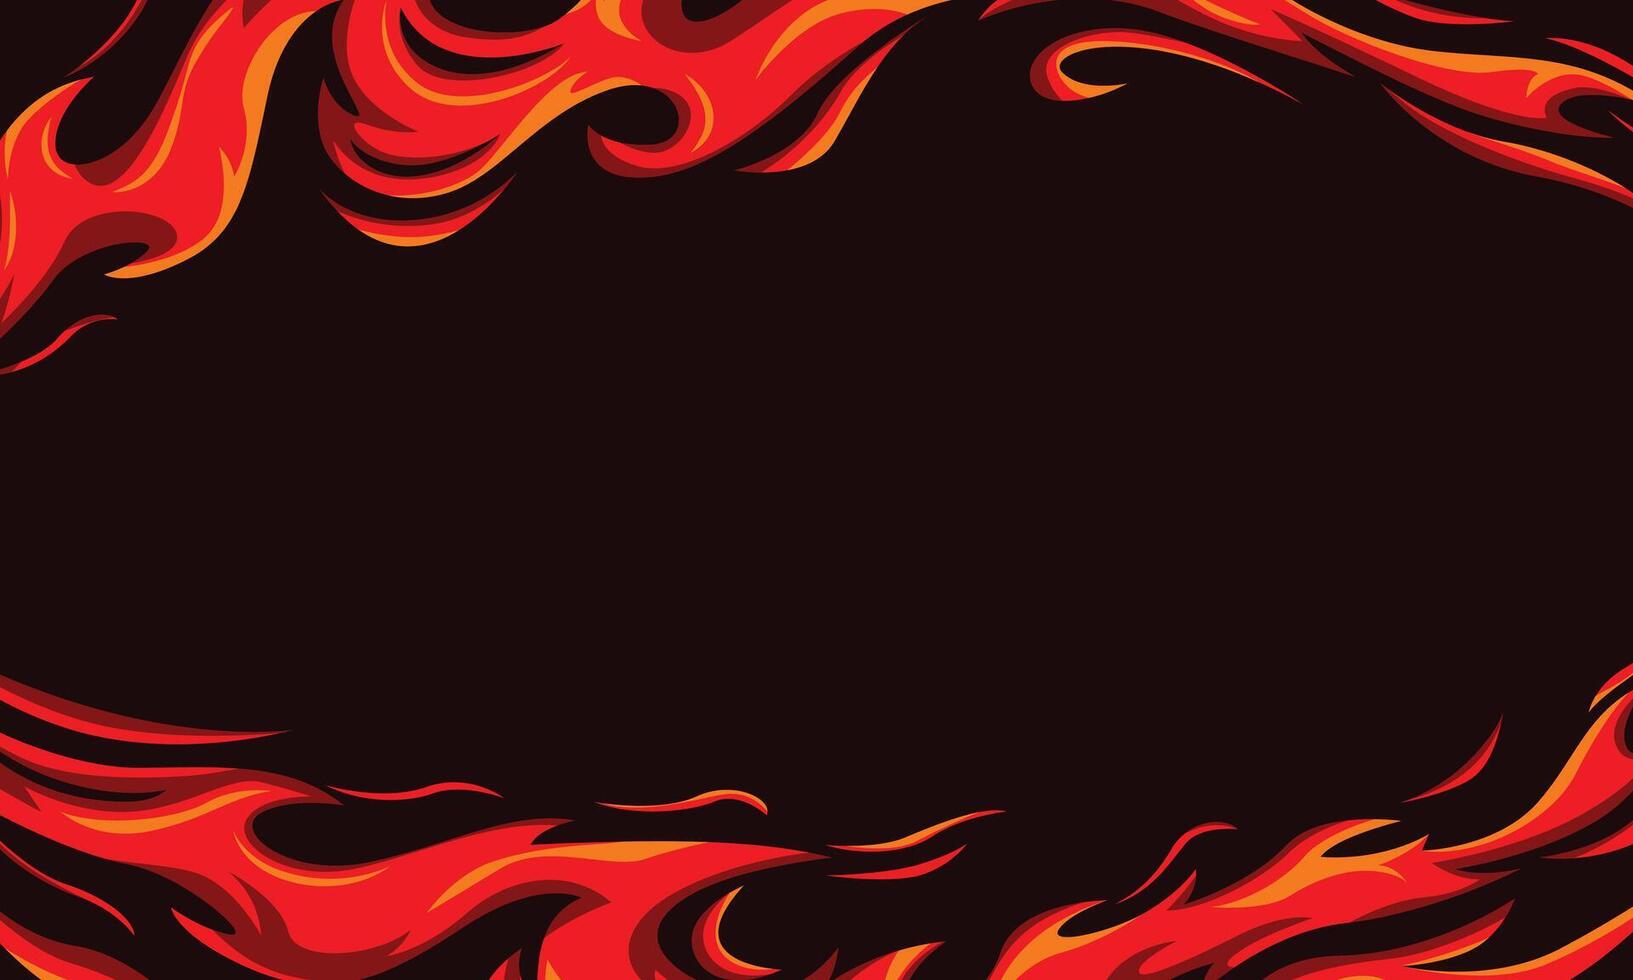 Flame blank background vector